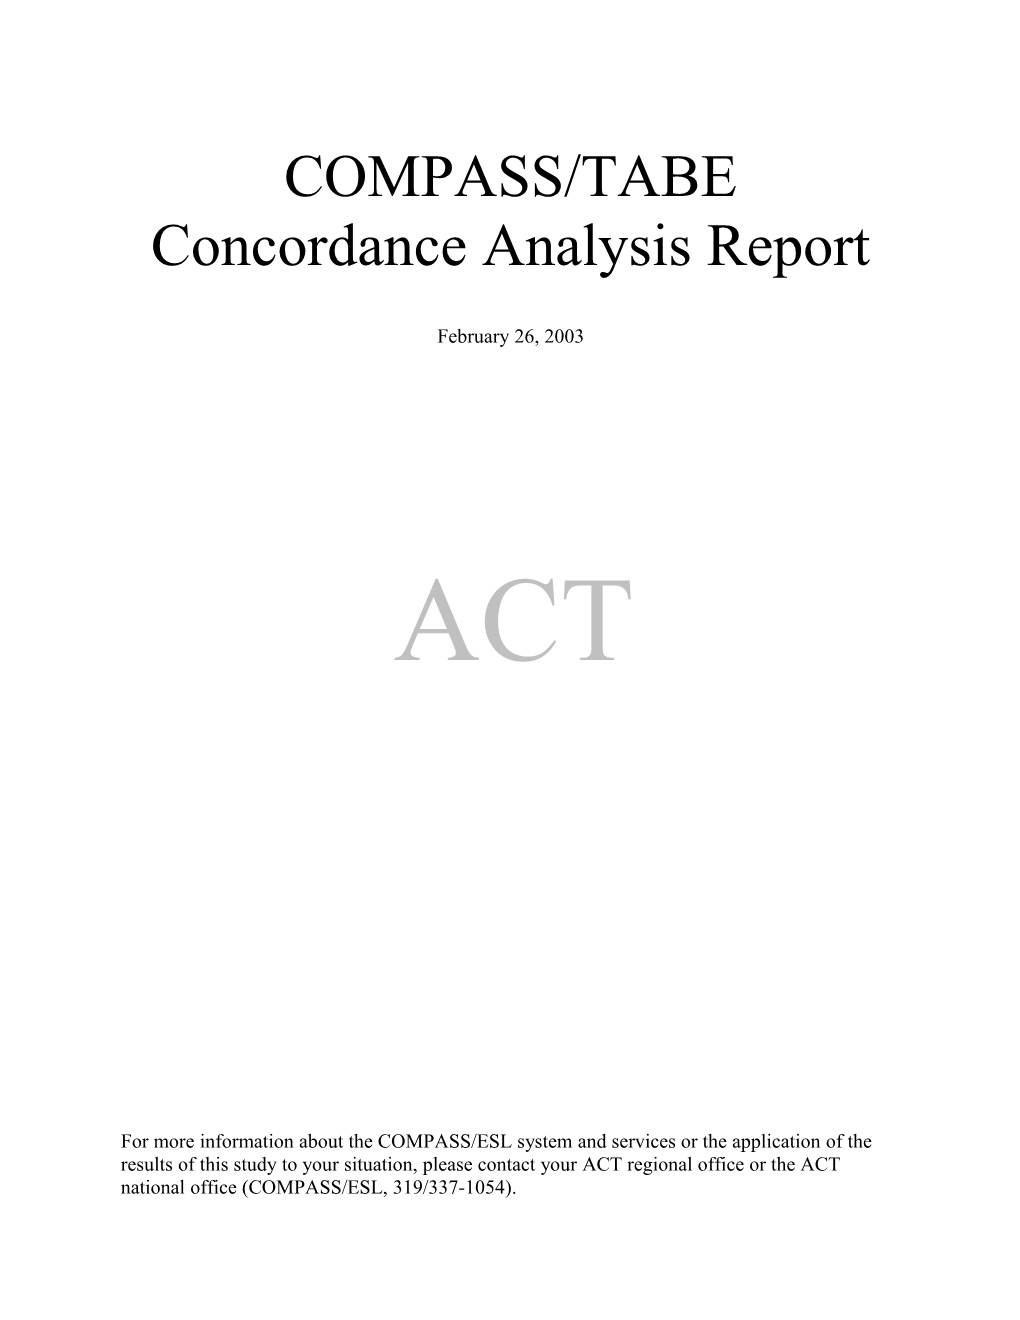 COMPASS/TABE Linkage Report